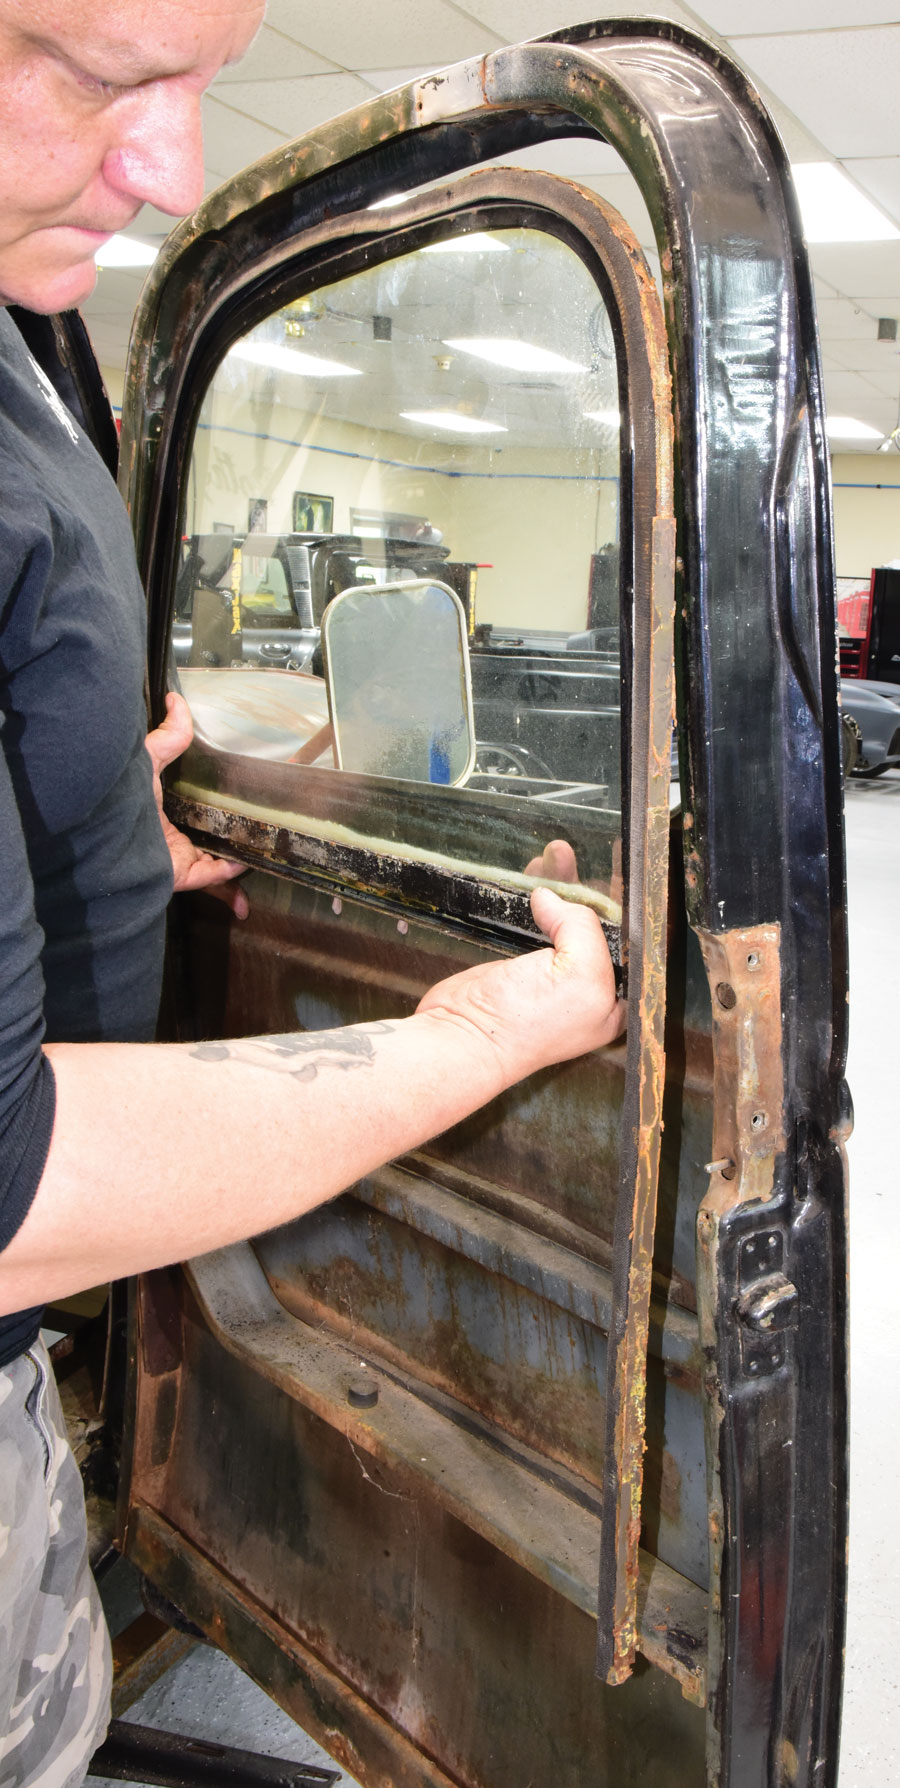 6: Finally, the door glass with frame and inner flex channel were removed to prepare them for a full rebuild with parts exclusively from Chevs of the 40’s